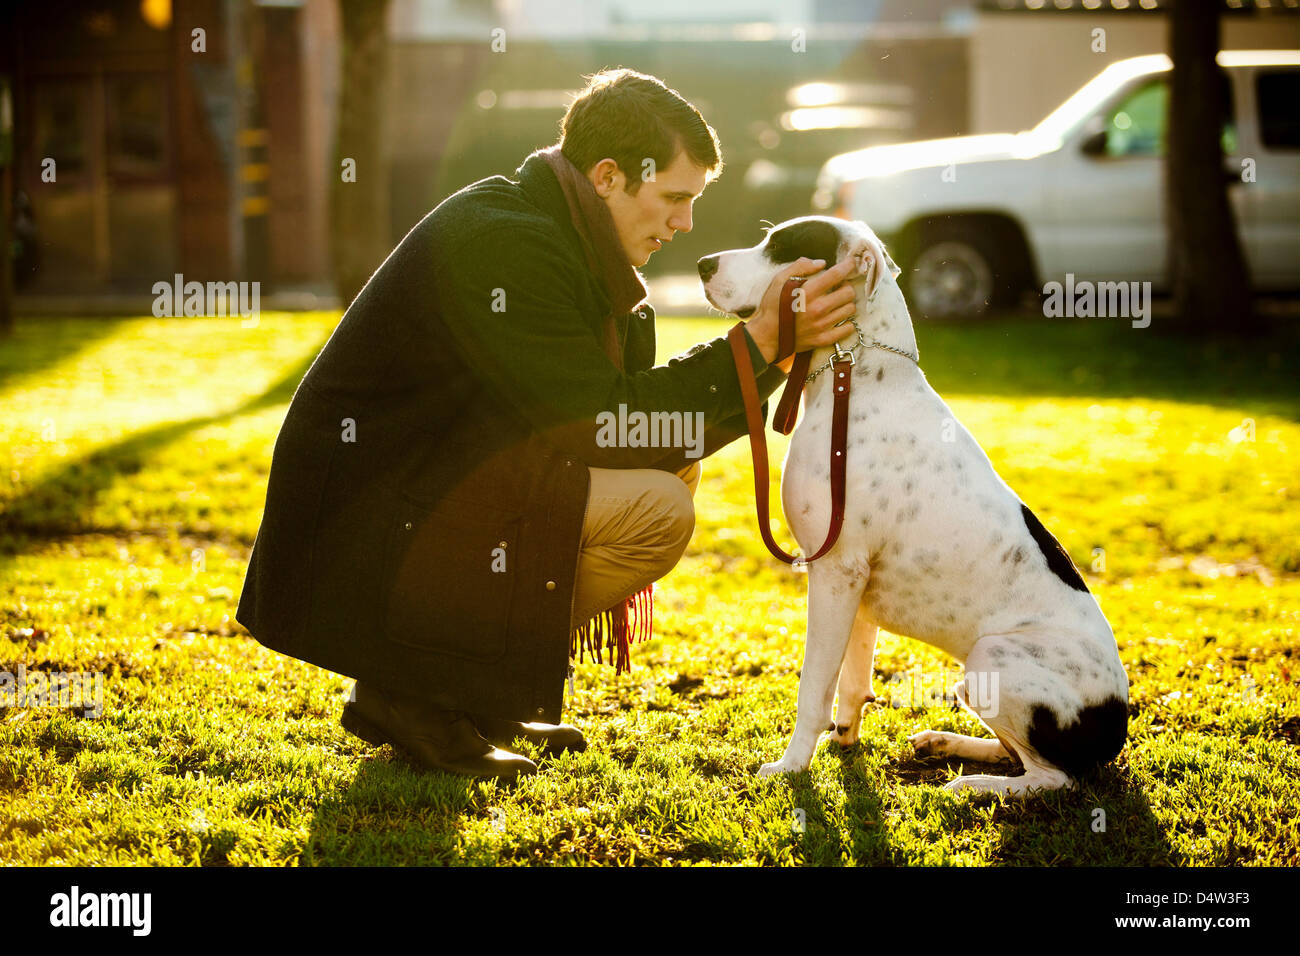 Man petting dog in park Banque D'Images